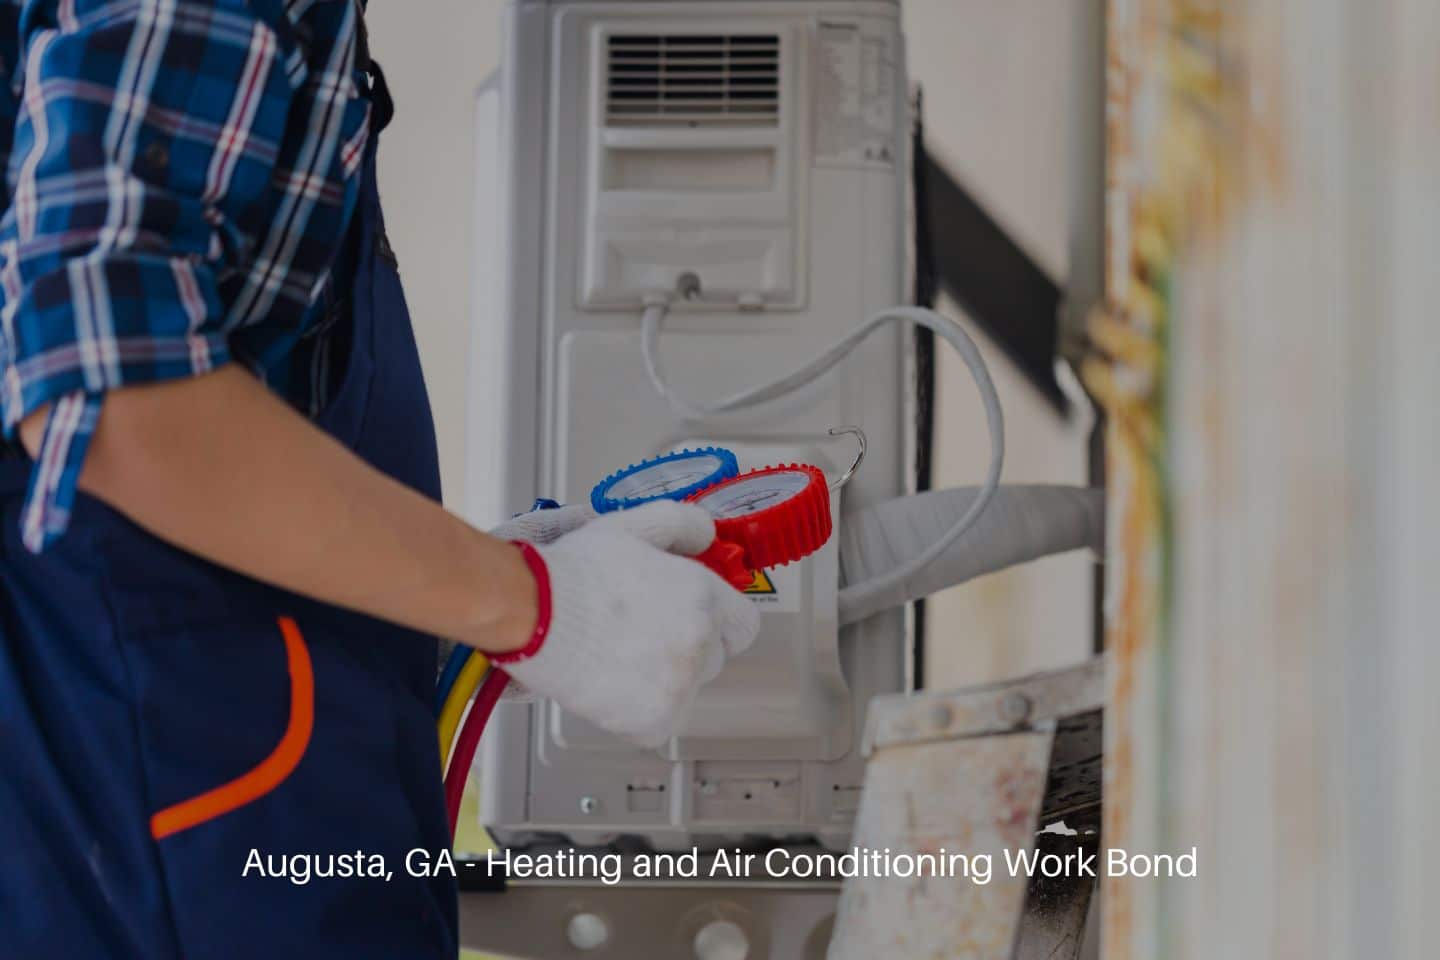 Augusta, GA - Heating and Air Conditioning Work Bond - Air conditioning repair. Repairman fixing air conditioning system.